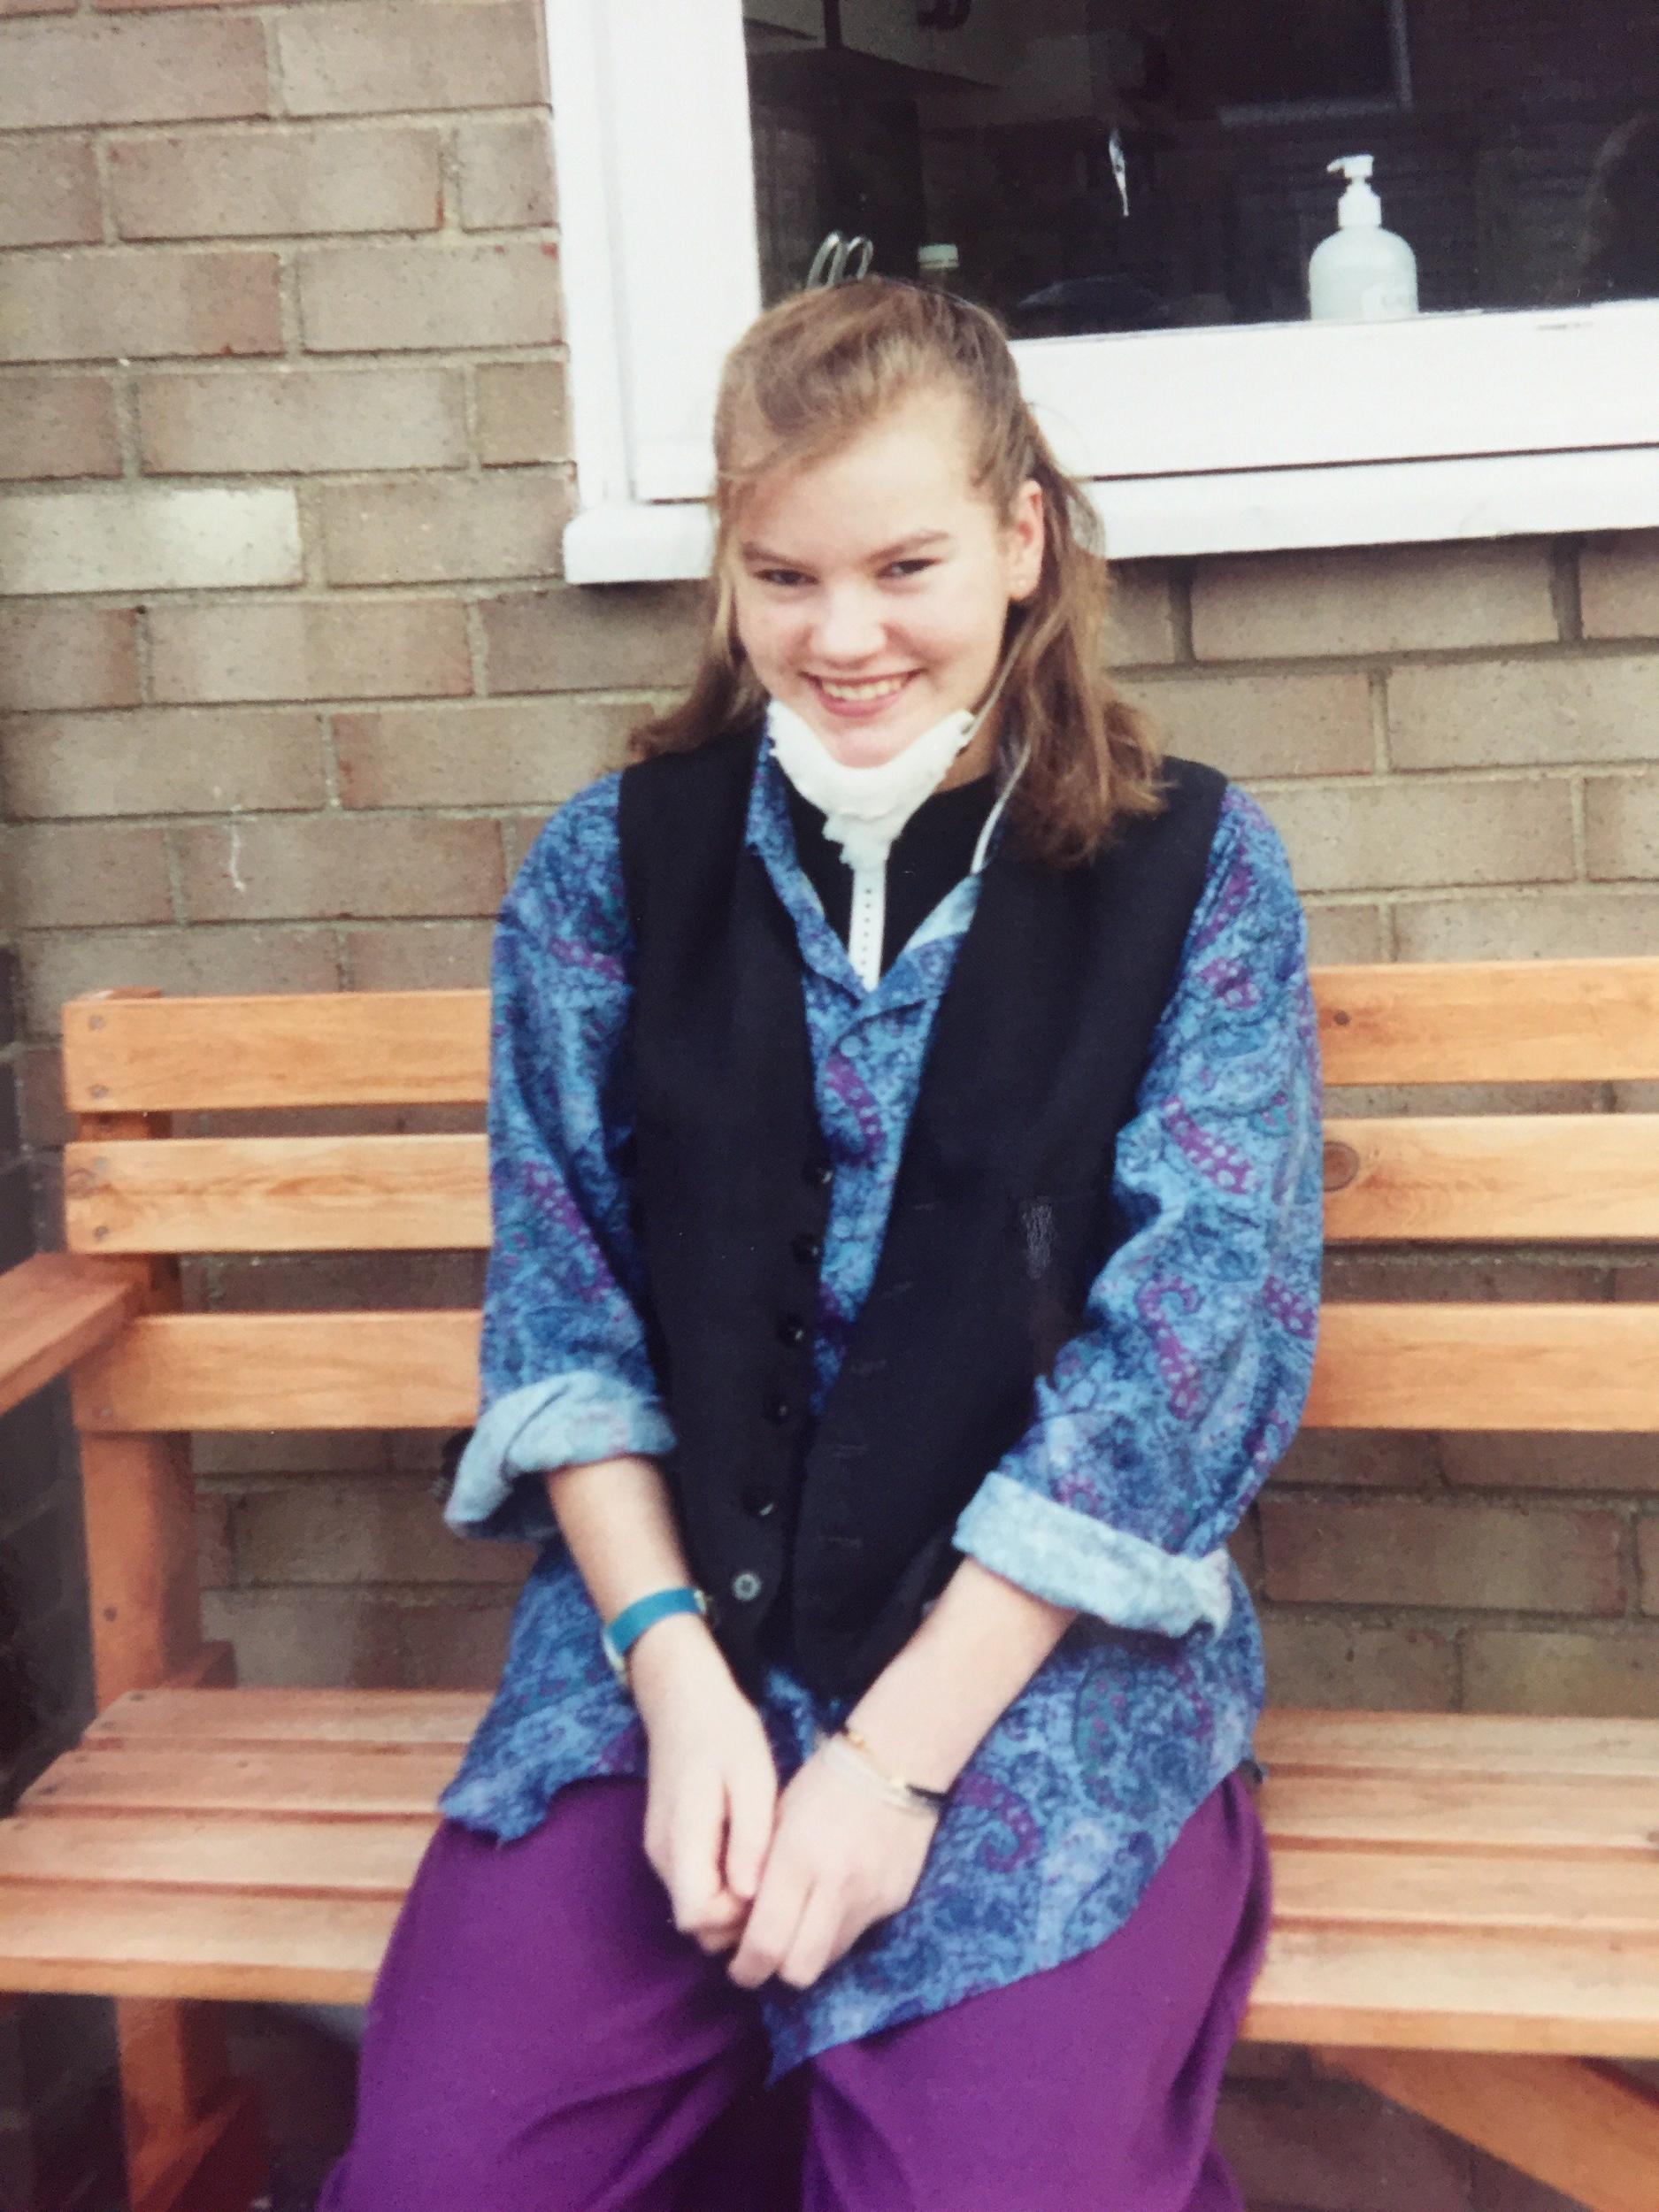 Liz Brown was told at 14 that she shouldn't expect to survive into adulthood